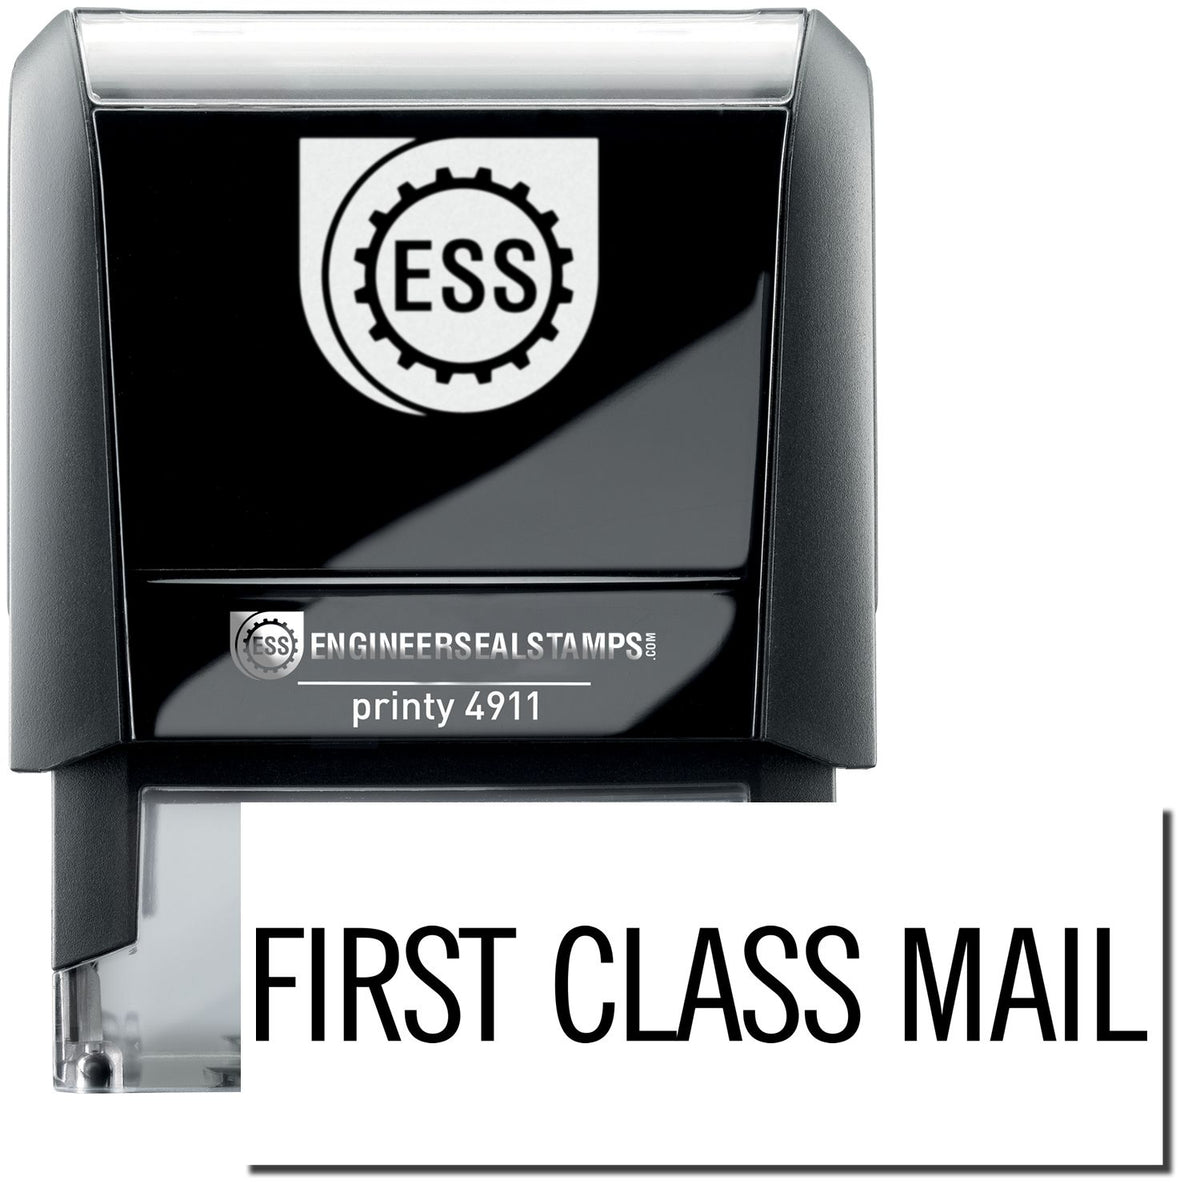 A self-inking stamp with a stamped image showing how the text &quot;FIRST CLASS MAIL&quot; in a narrow font is displayed after stamping.